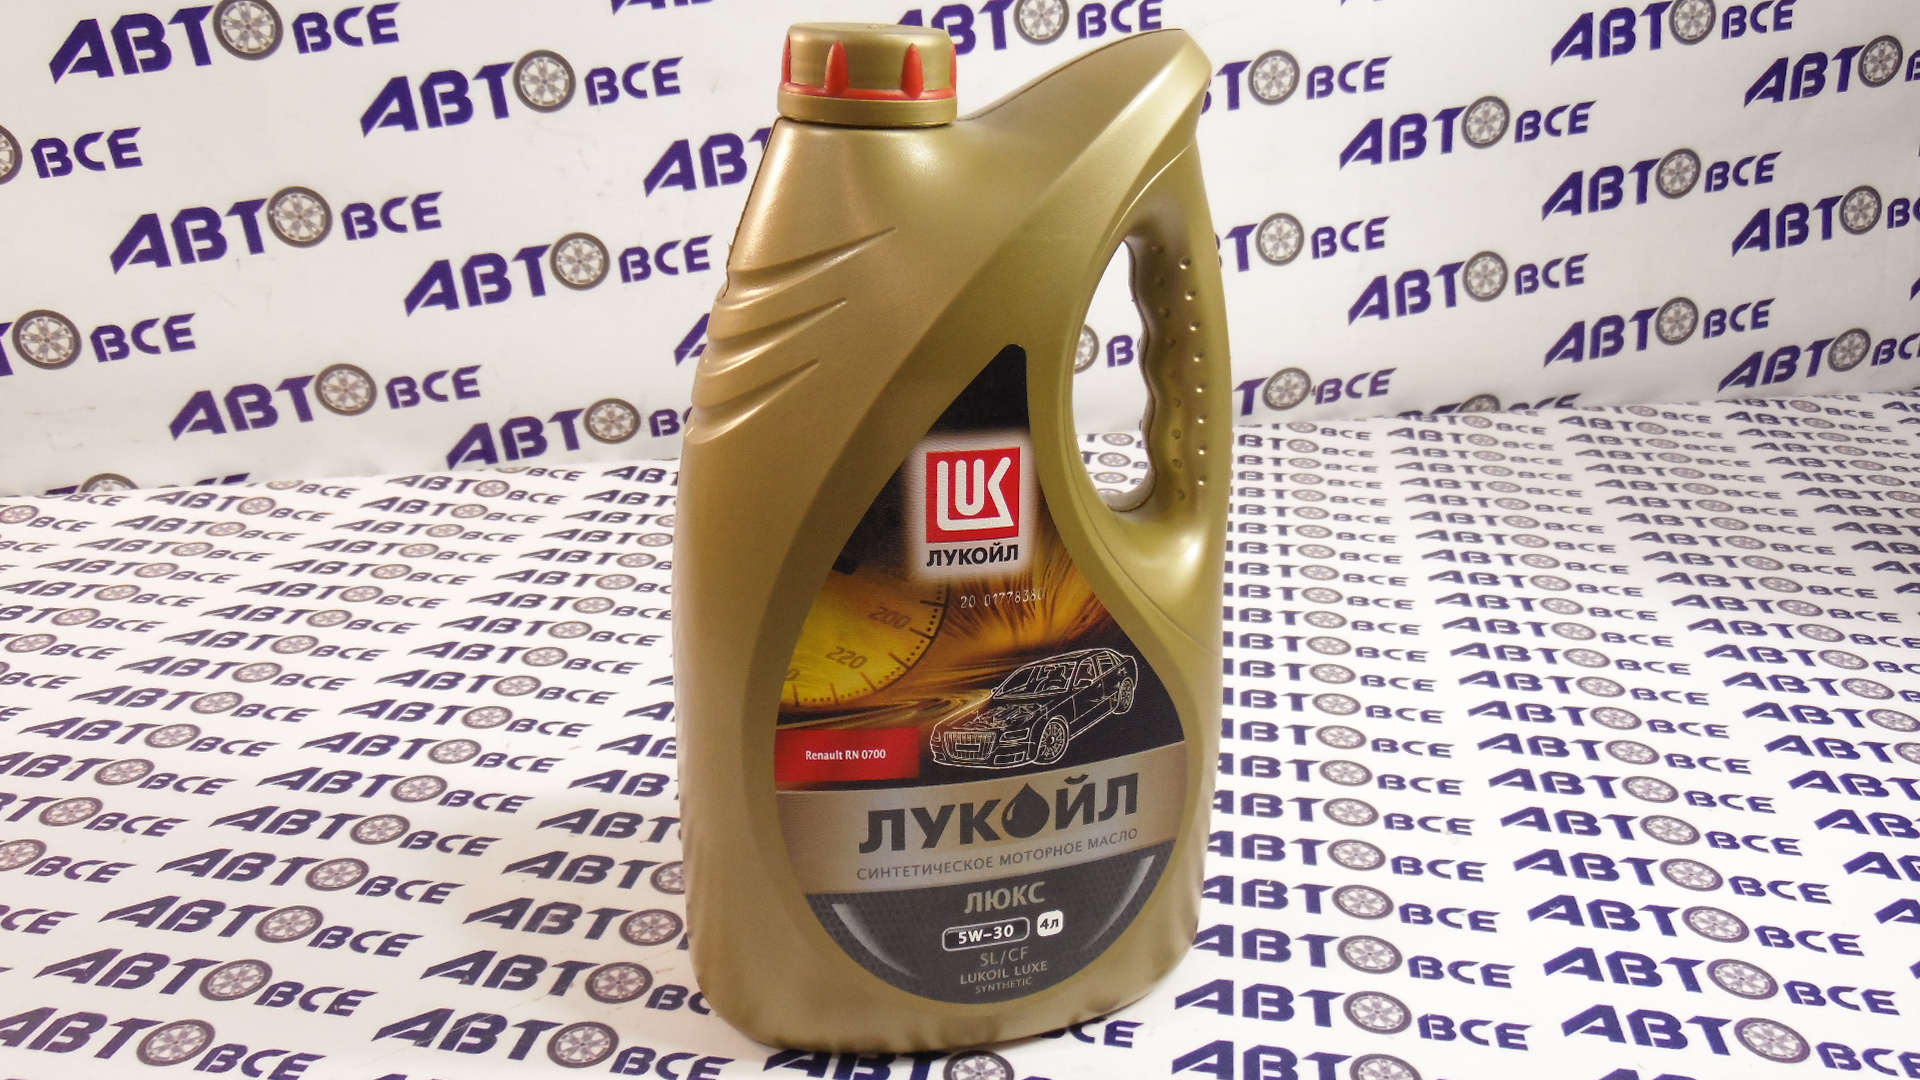 Лукойл масло 2023. Lukoil 196256. 5w30 Luxe SL/CF 4l. Luxe 5w30 SL\CF 4 Ë 801880. Моторное масло Лукойл Люкс 5w30.